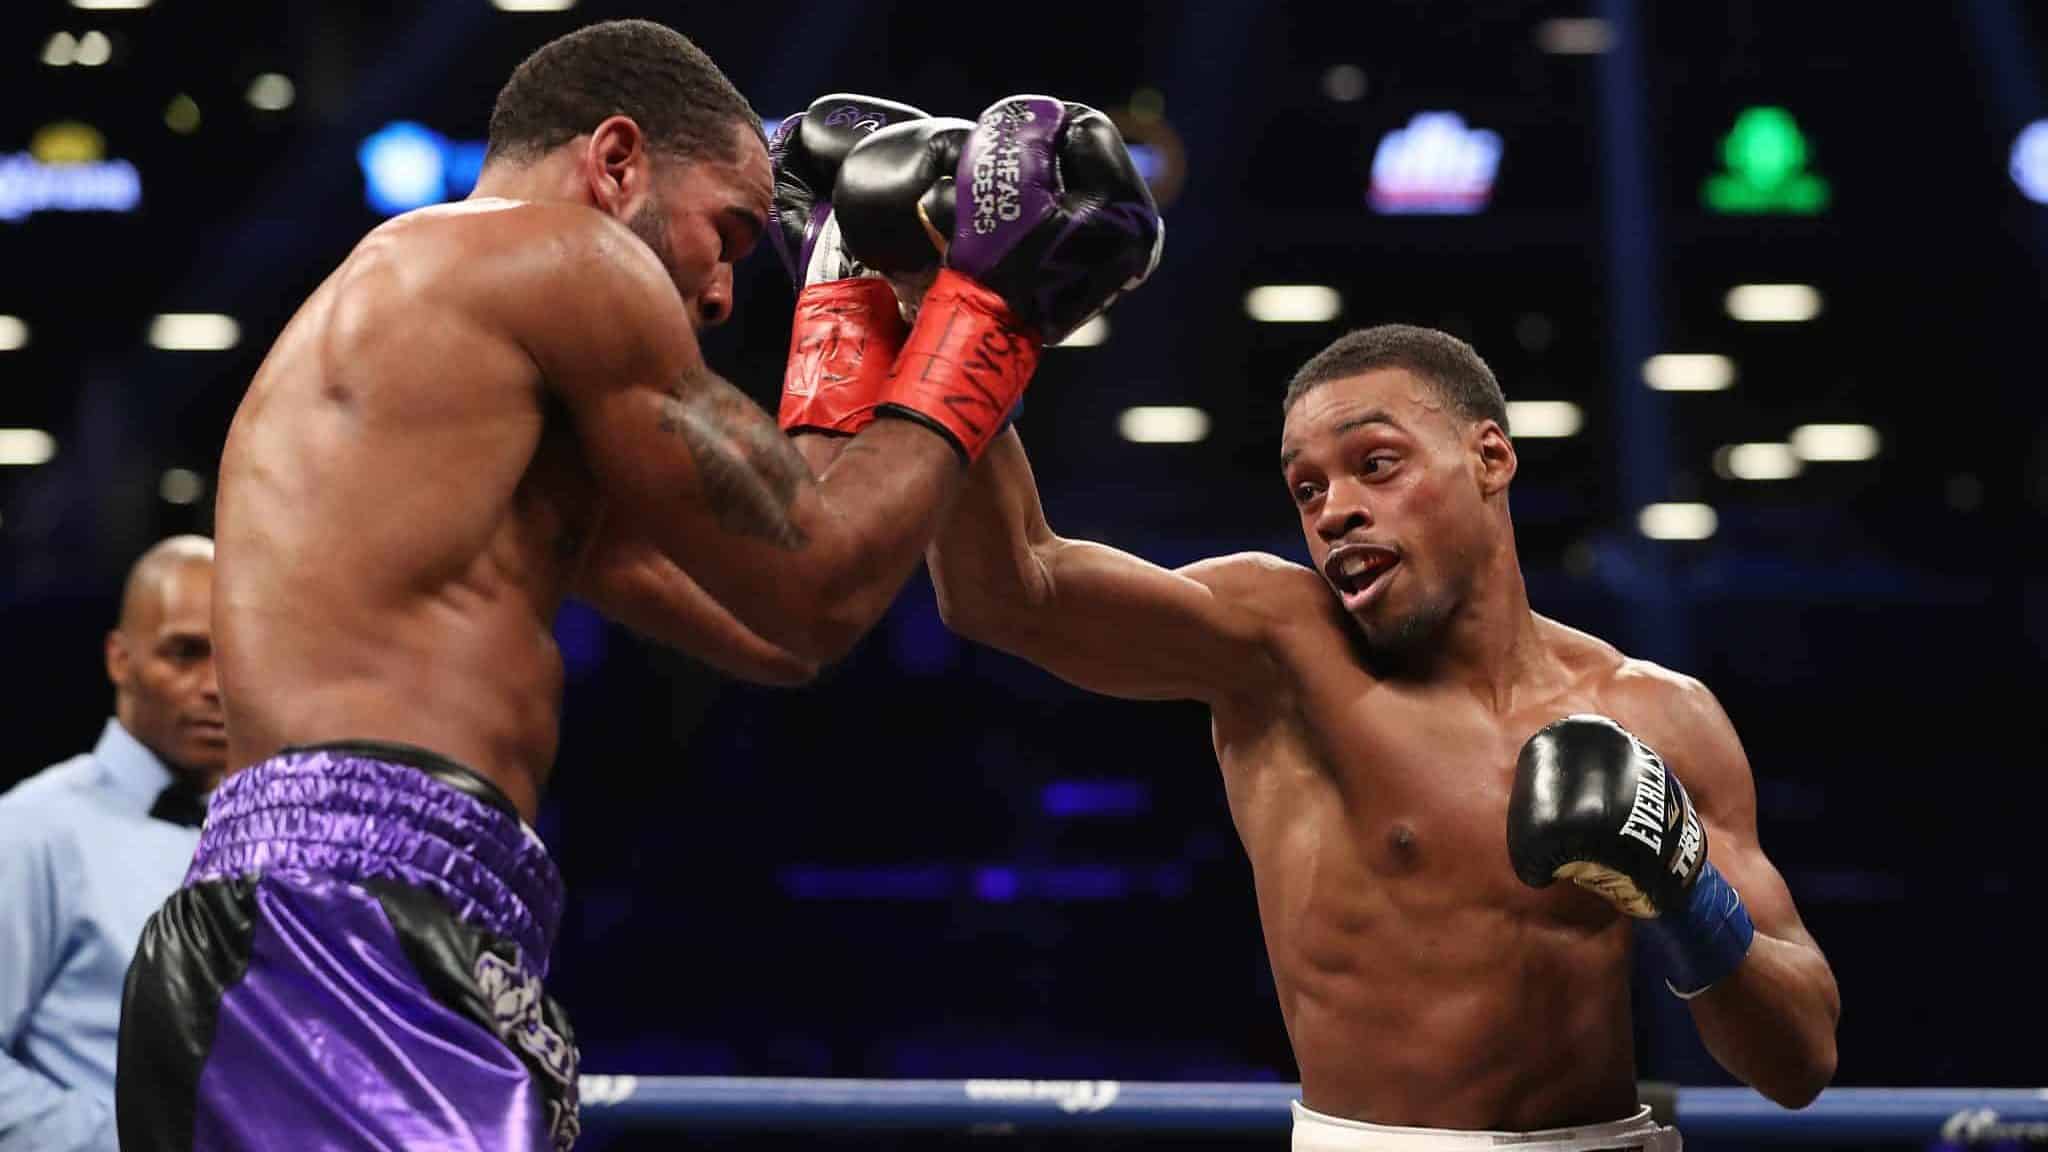 NEW YORK, NY - JANUARY 20: Errol Spence punches Lamont Peterson during their IBF Welterweight title fight at the Barclays Center on January 20, 2018 in New York City.